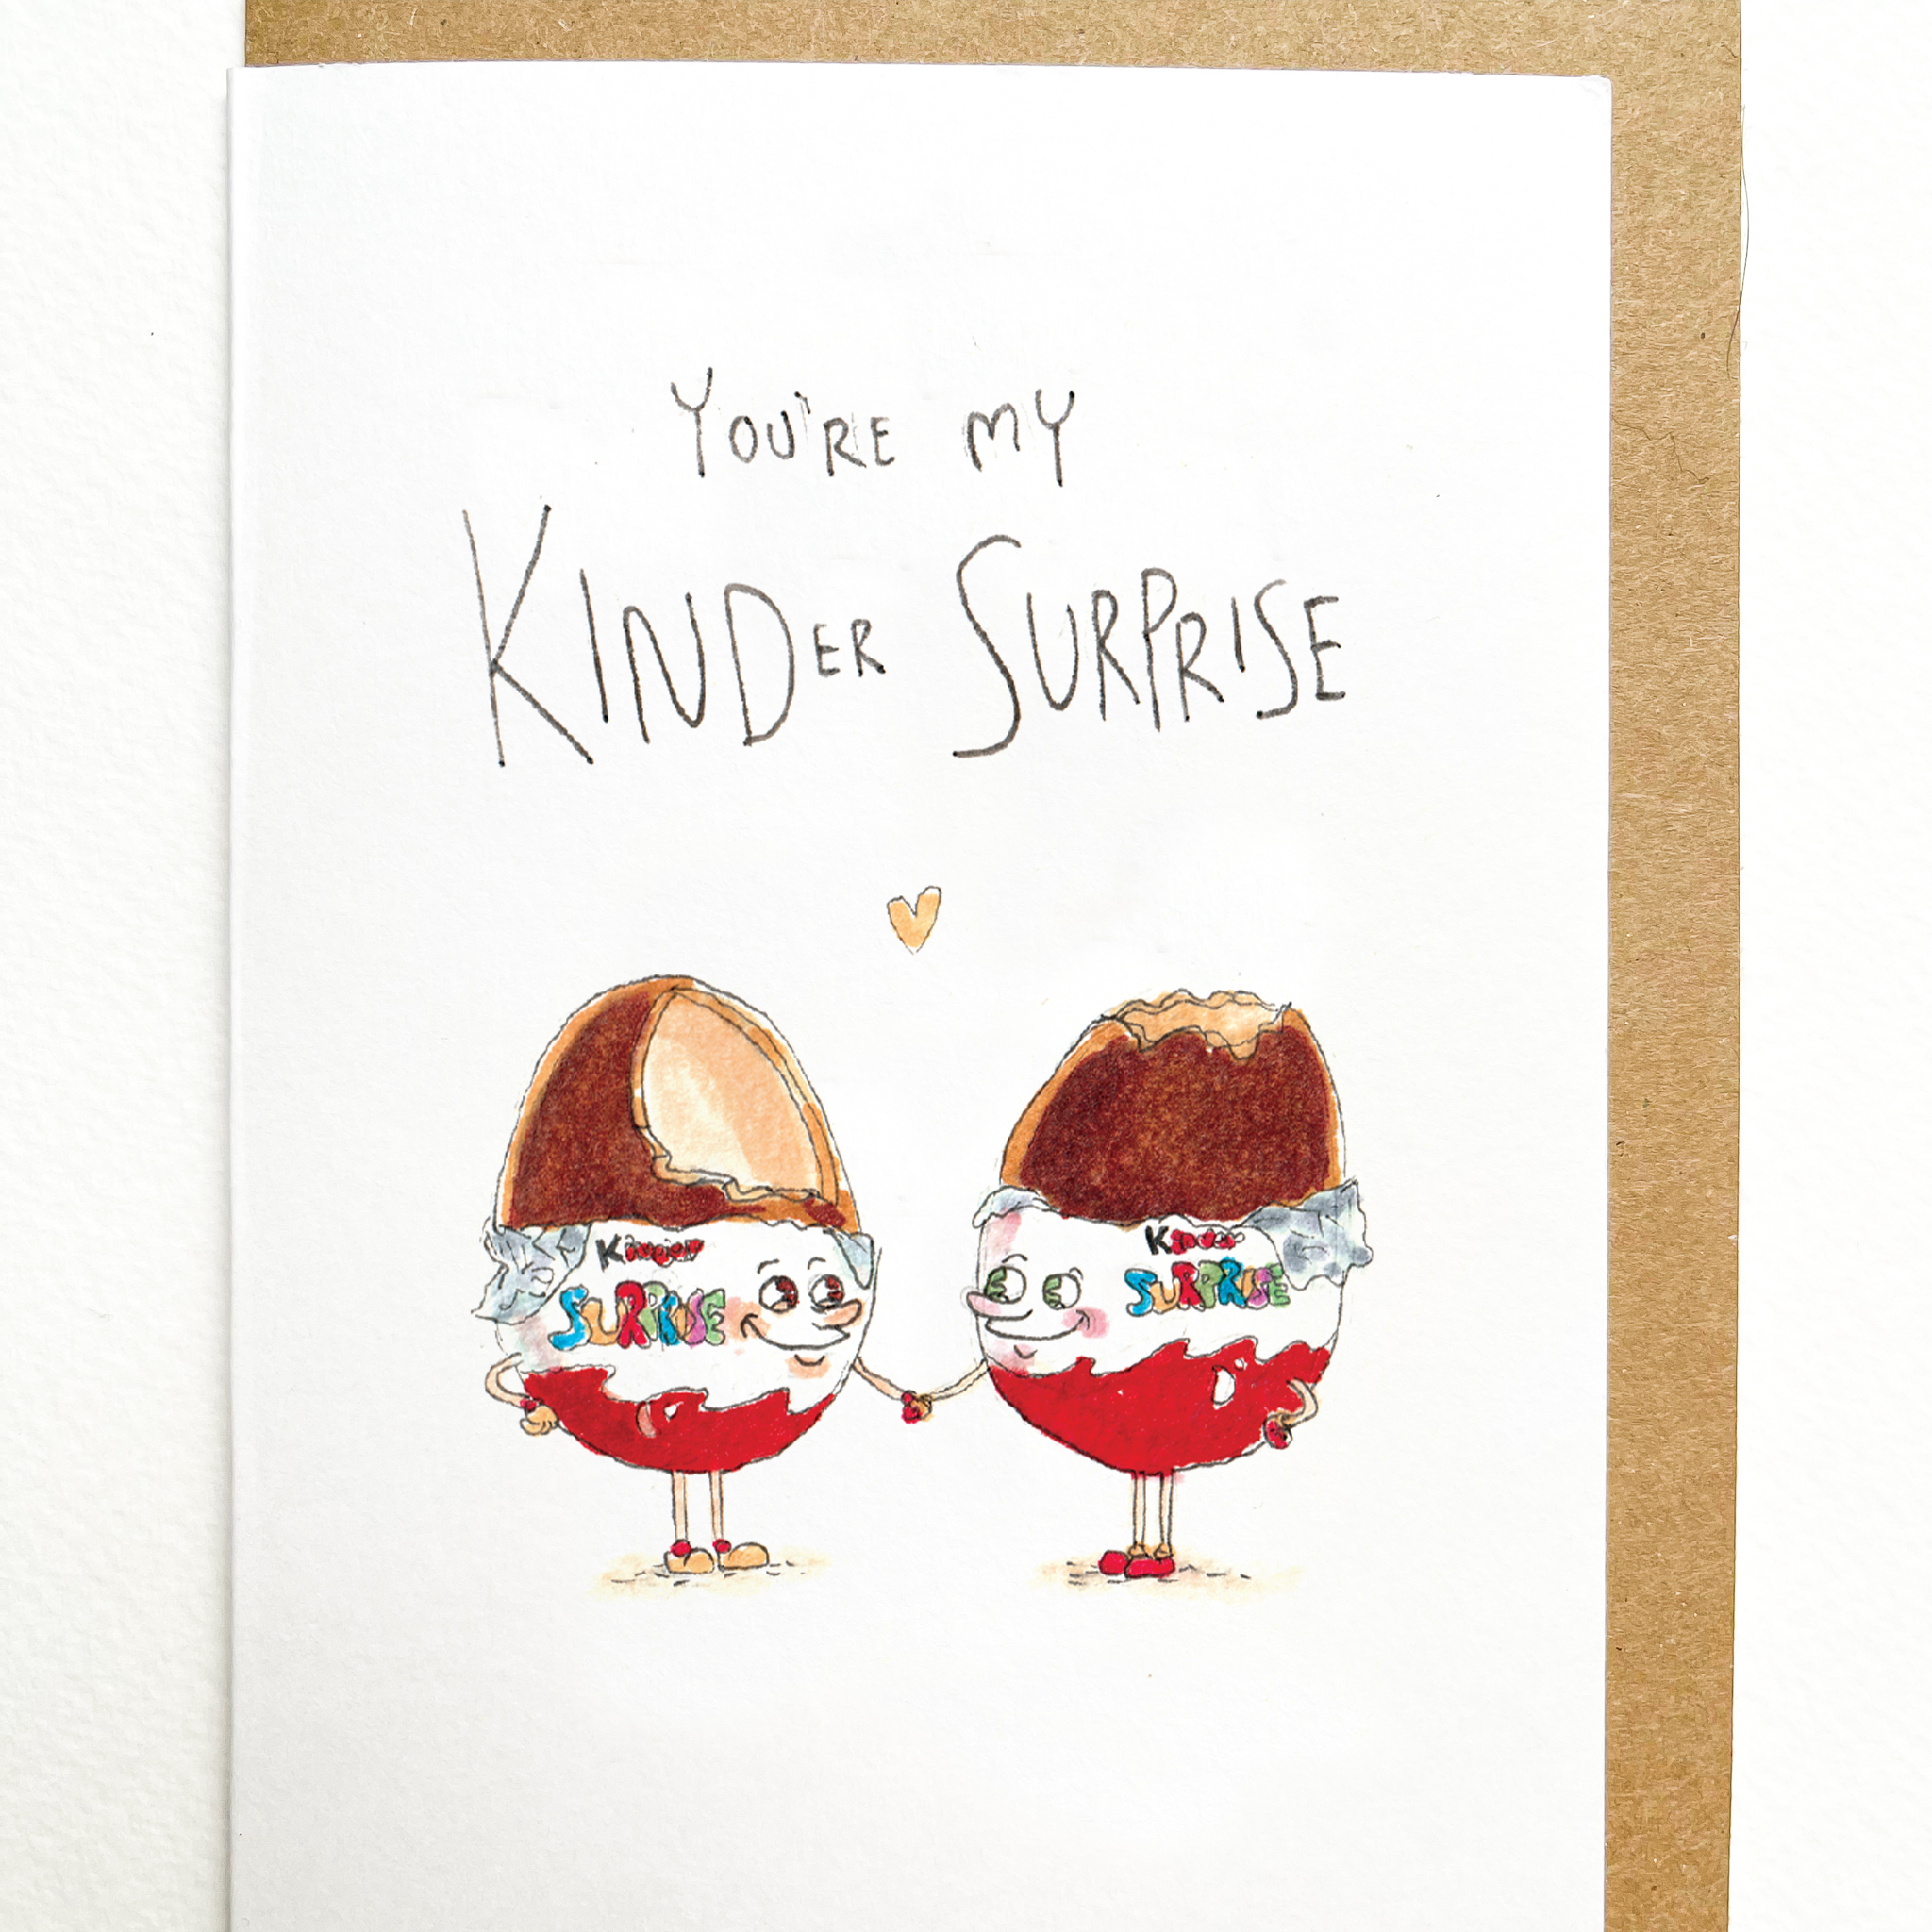 You're My Kinder Surprise